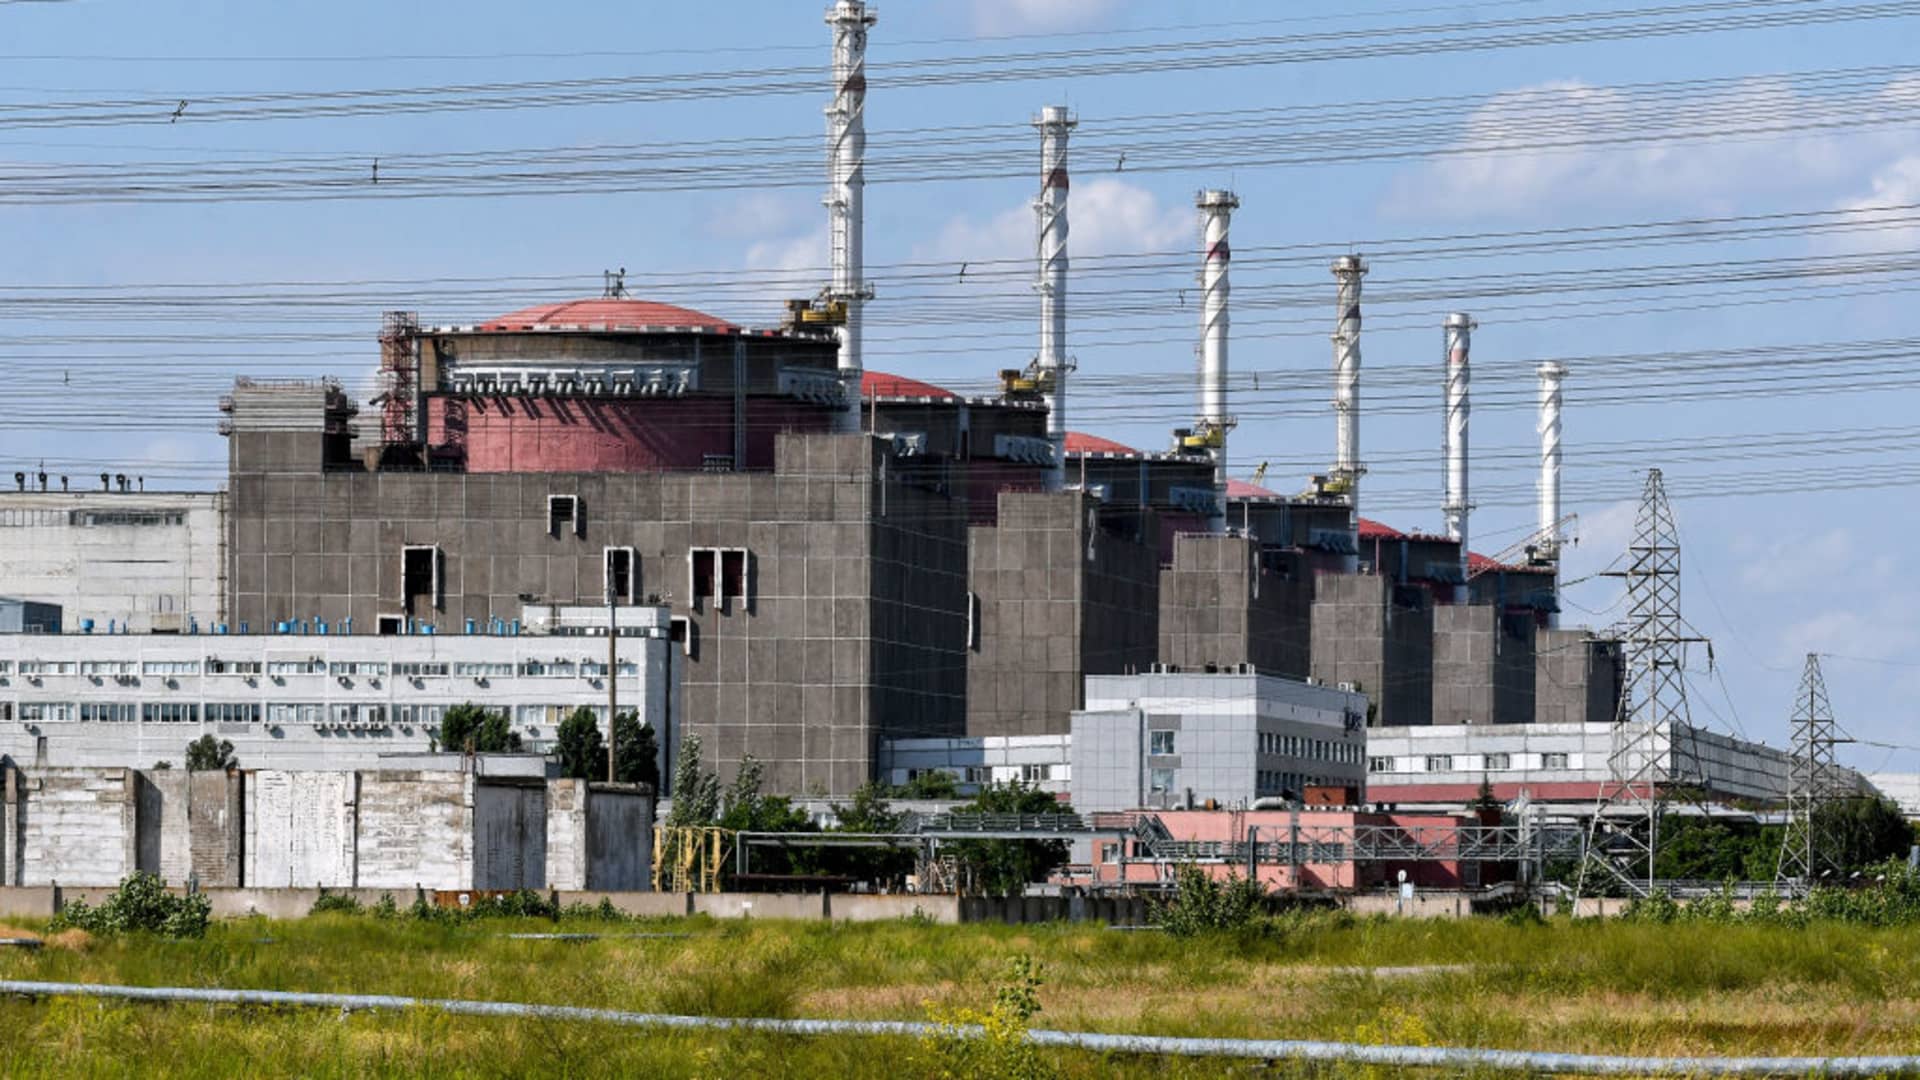 The Zaporizhzhia nuclear power plant, the largest such plant in Europe, seen here in 2019.